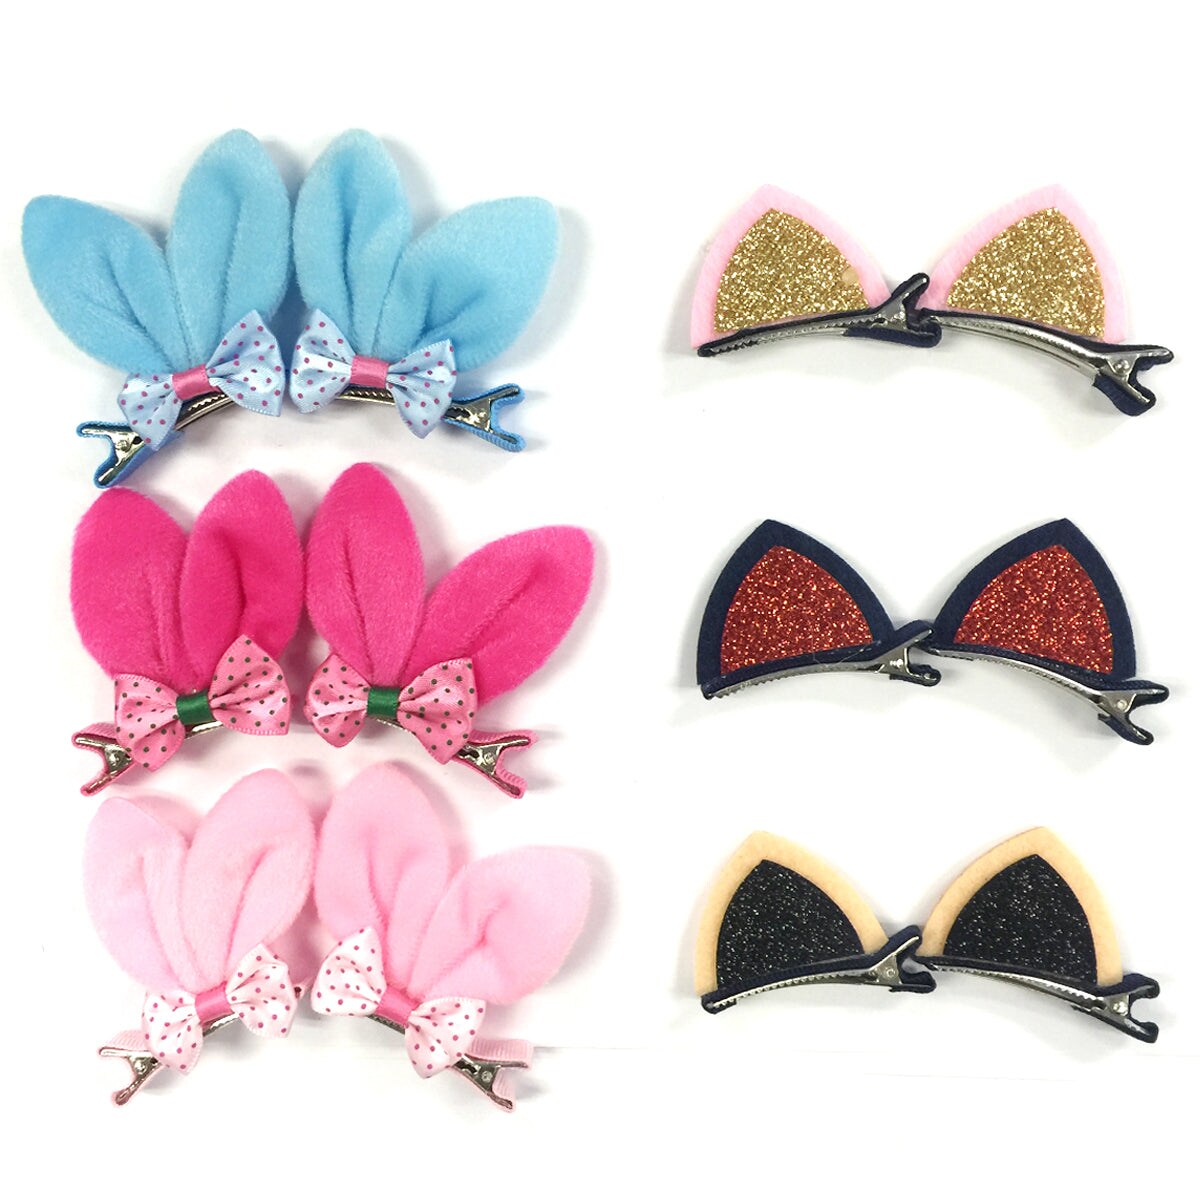 Wrapables Rabbit and Cat Ears with Bow Alligator Hair Clips (Set of 12), Rabbit and Cat Ears